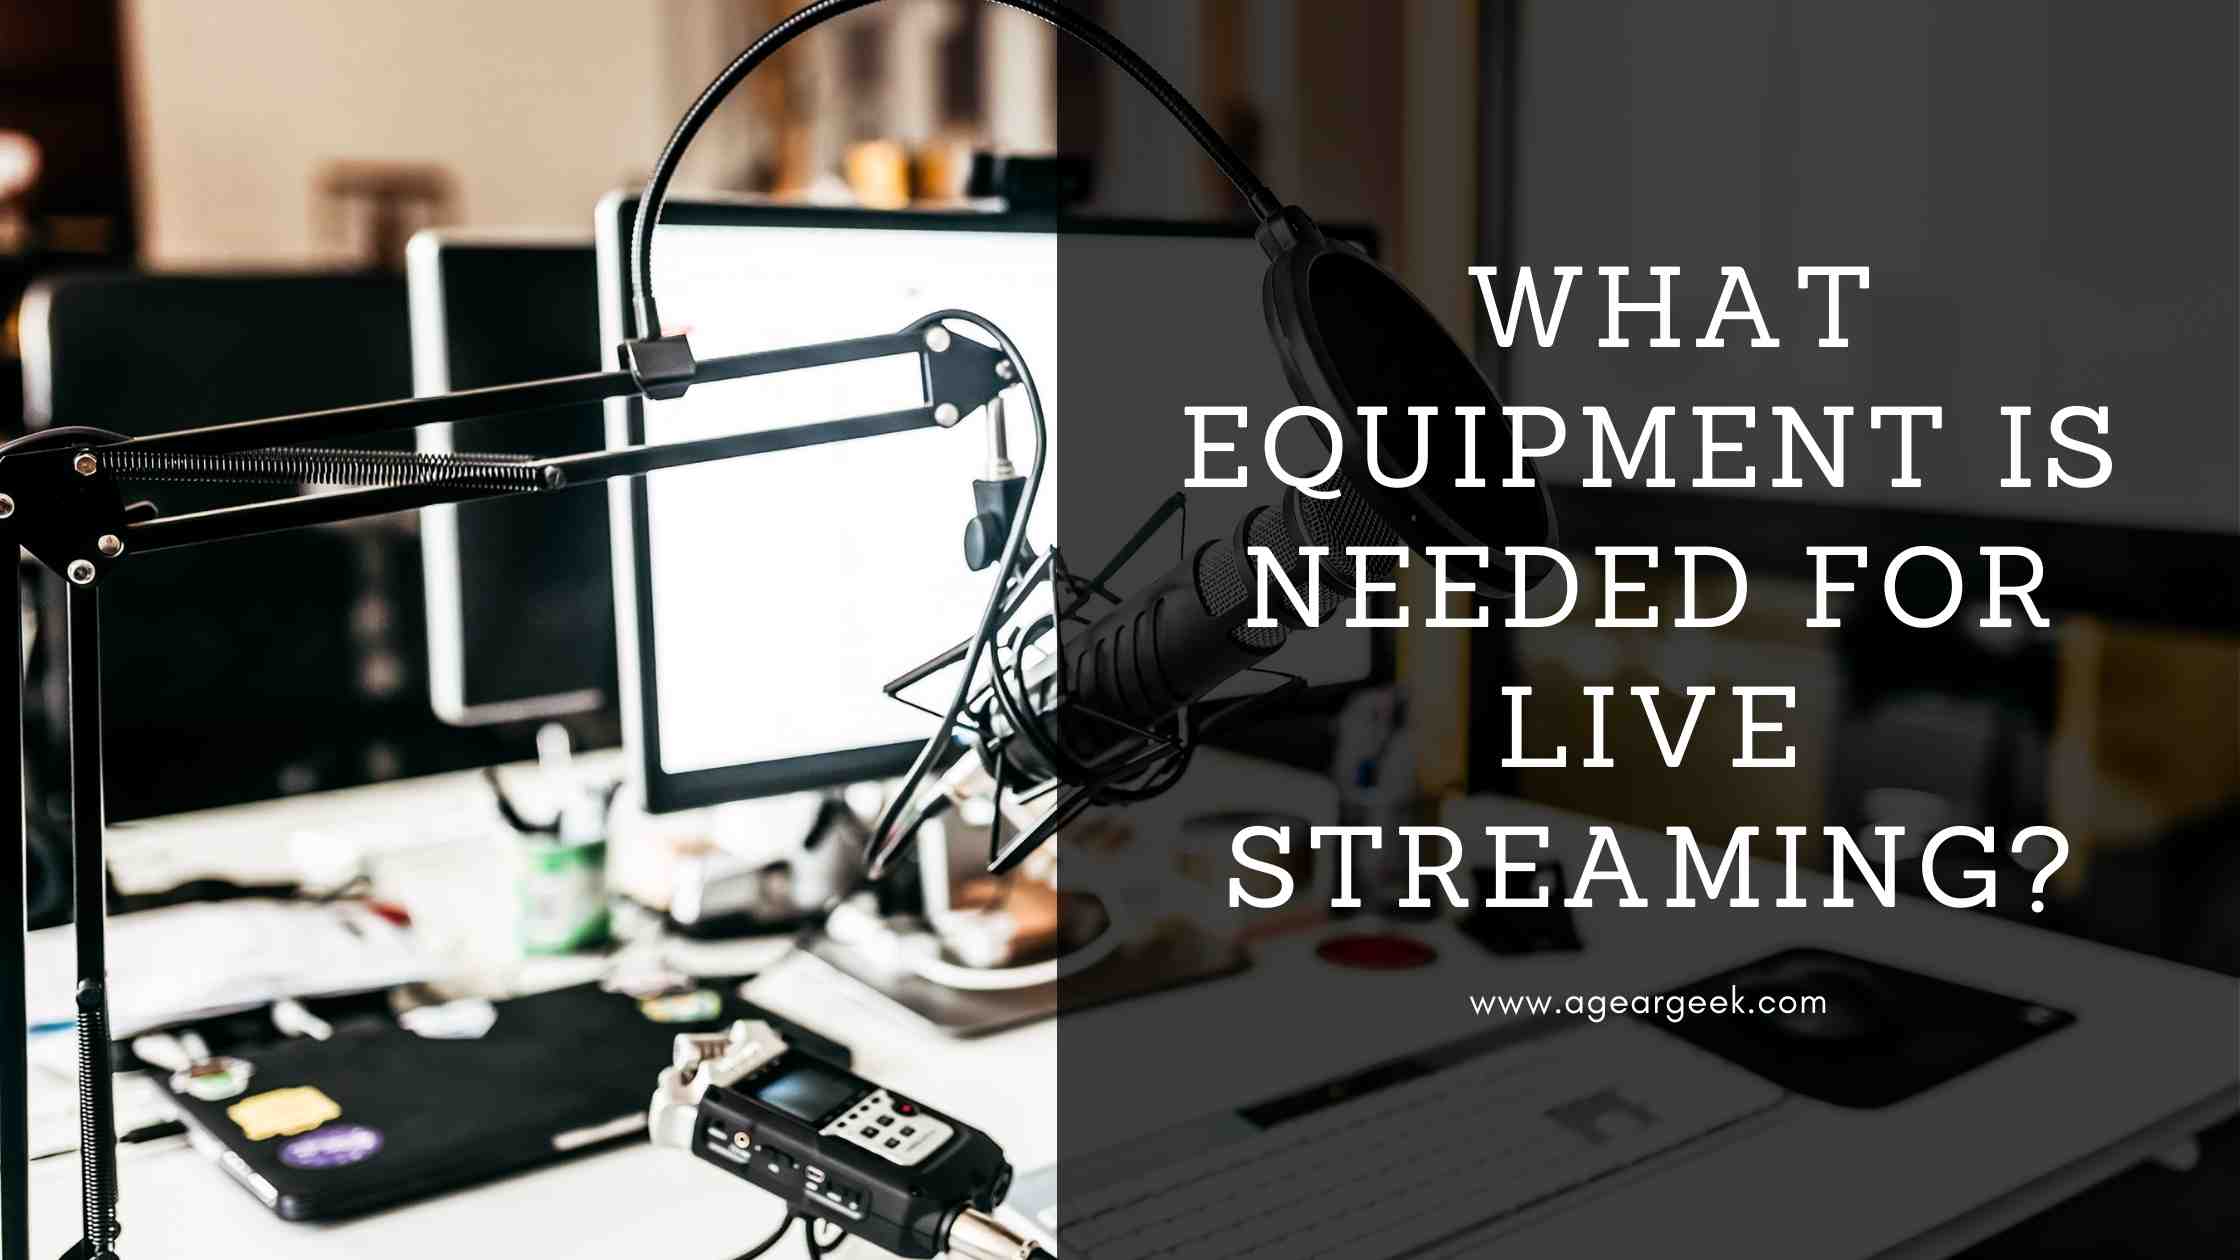 What equipment is needed for live streaming